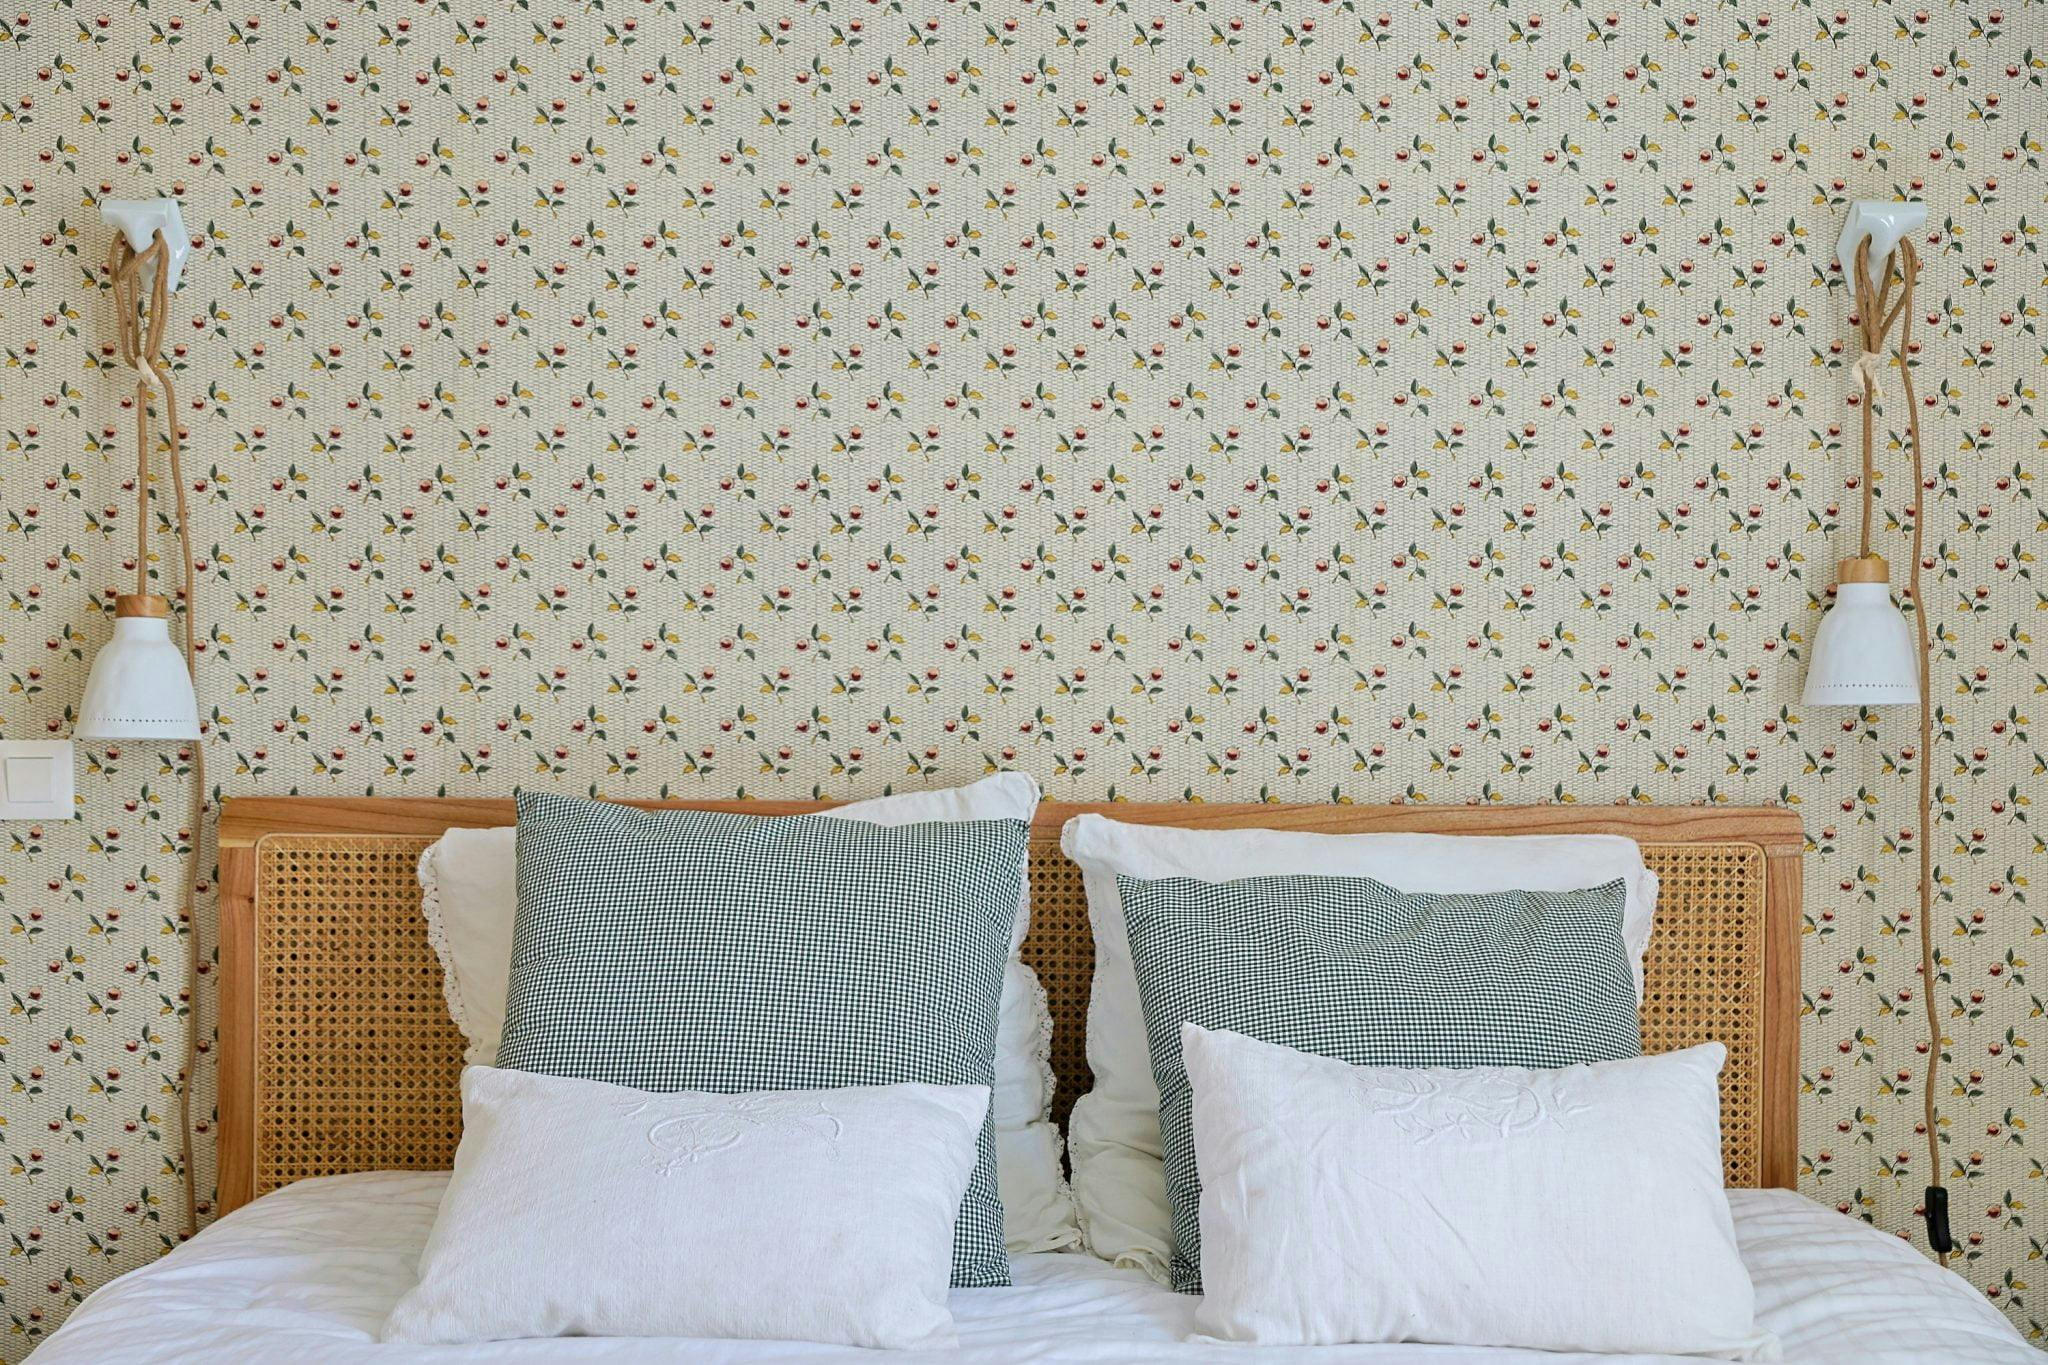 Headboard with floral wallpaper background